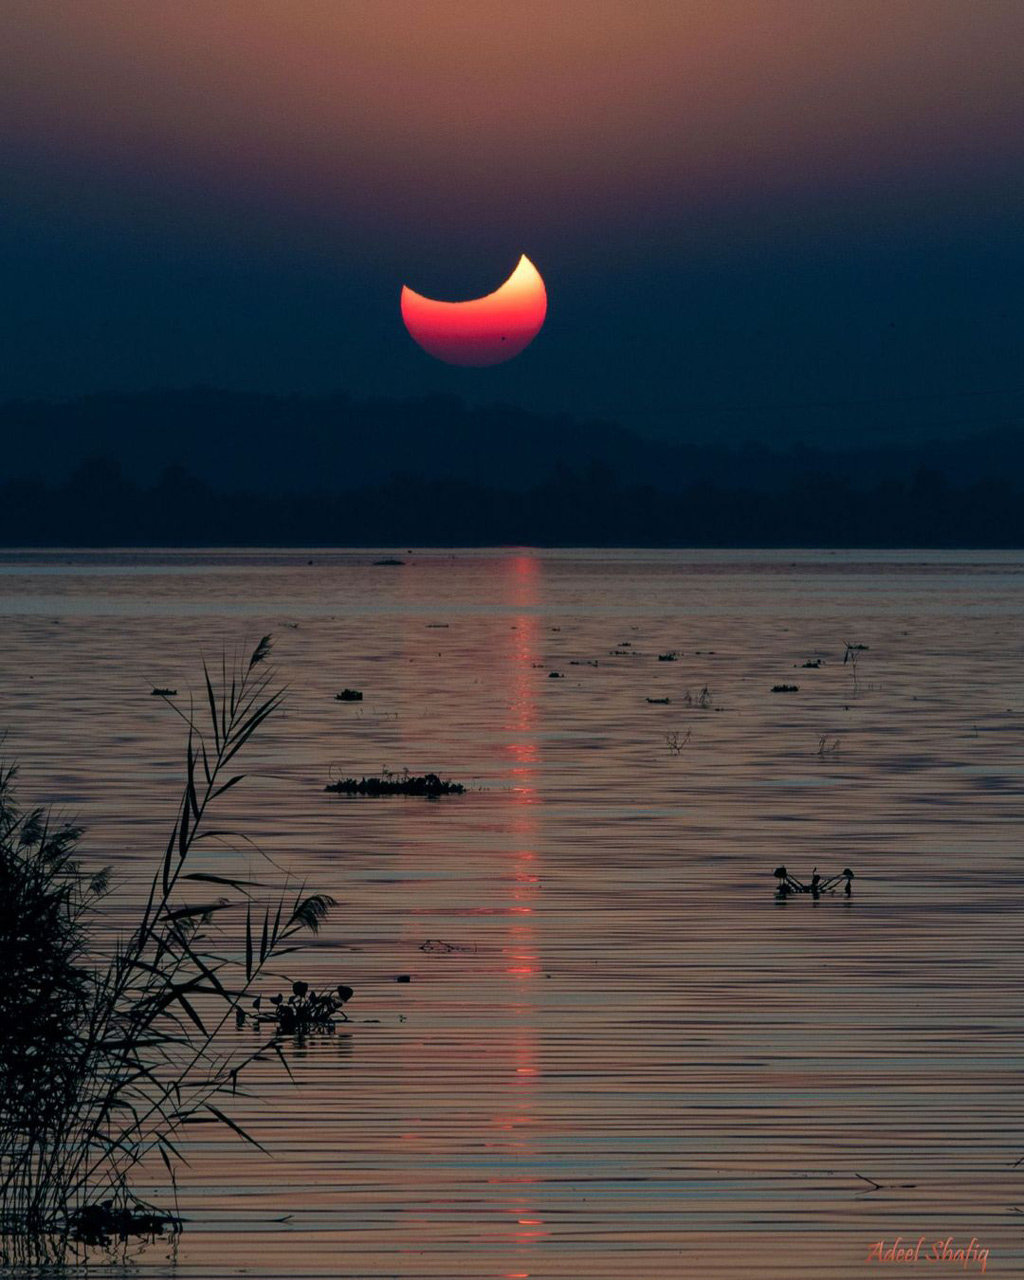 Partial solar eclipse from Earth